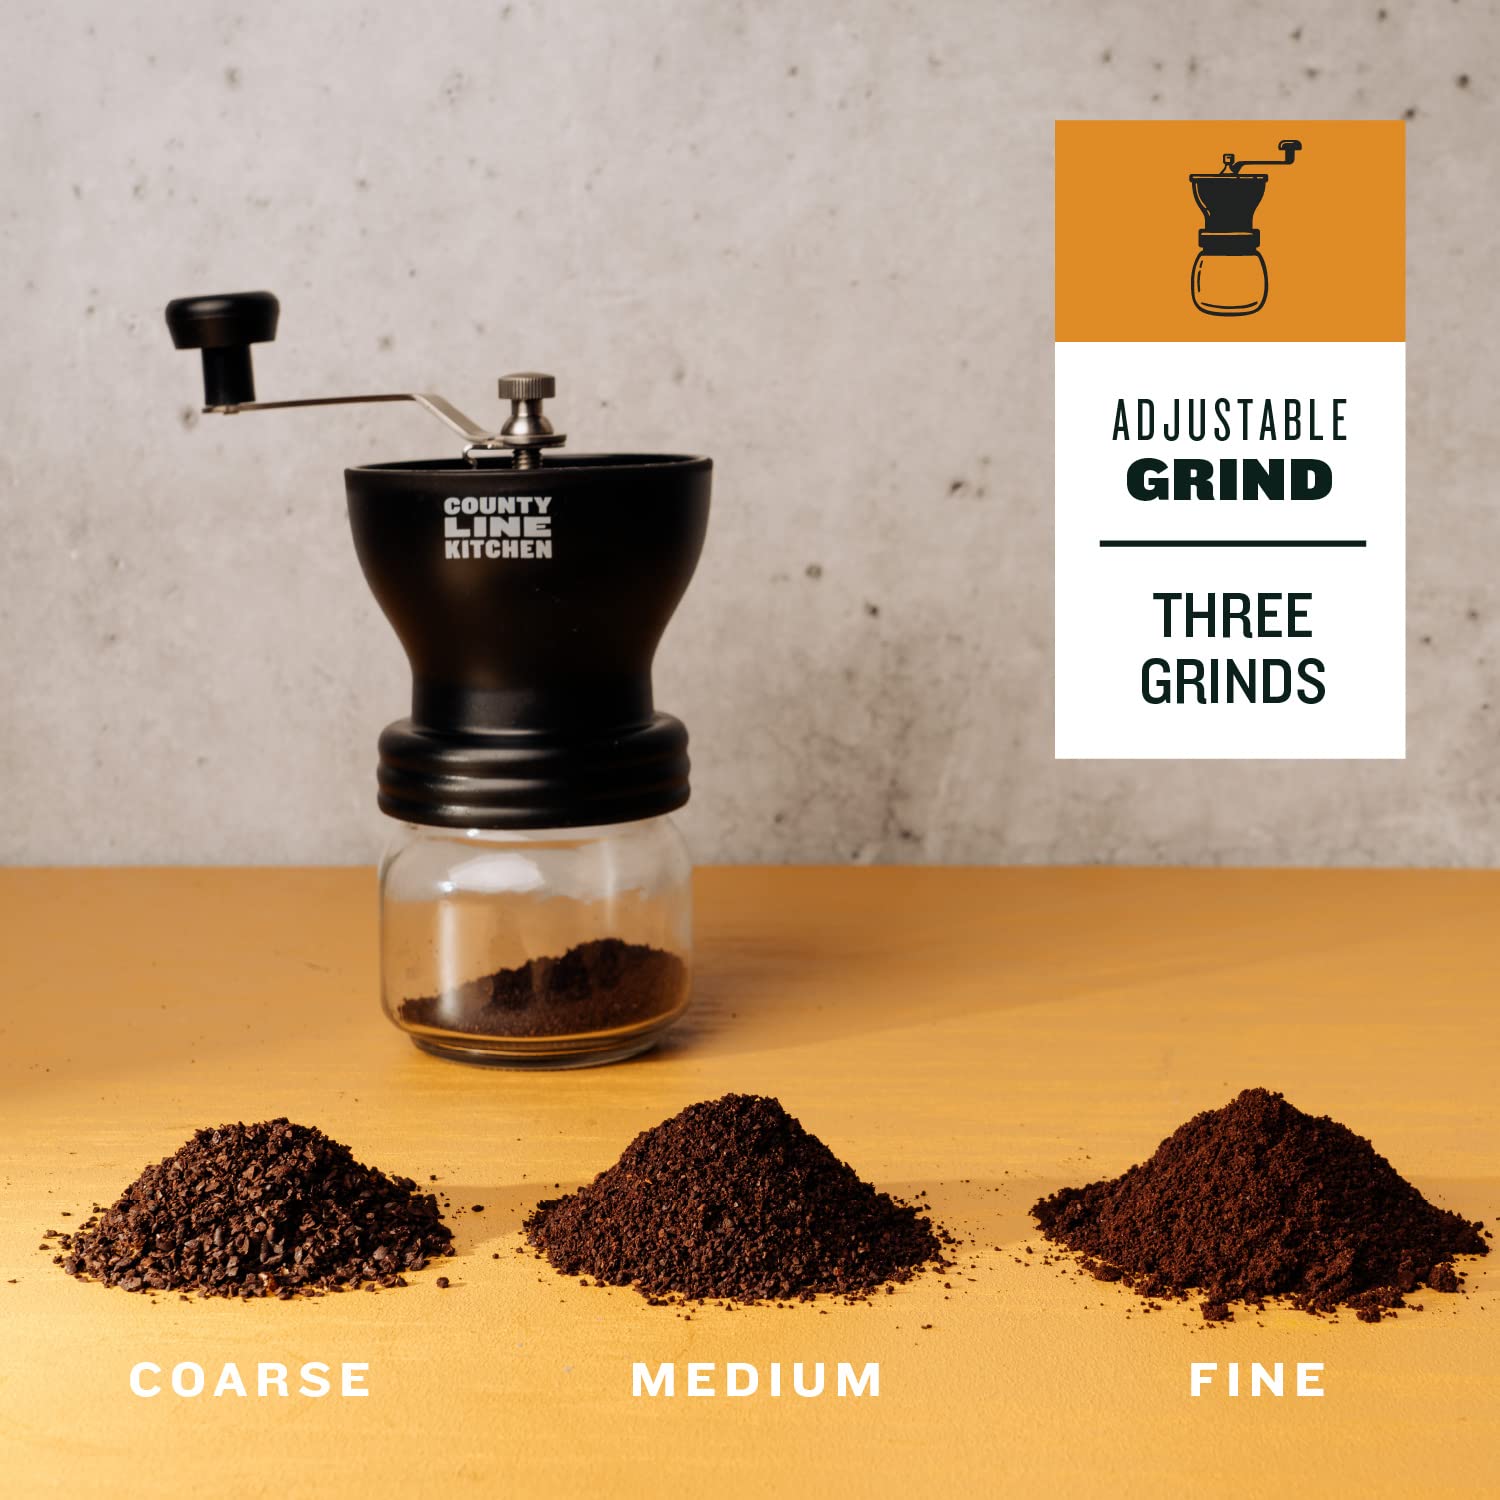 County Line Kitchen, Manual Coffee Grinder with Ceramic Burr, Adjustable Coarseness, Hand Coffee Bean Grinder, Two Glass Jars 250ml each with Metal Lids